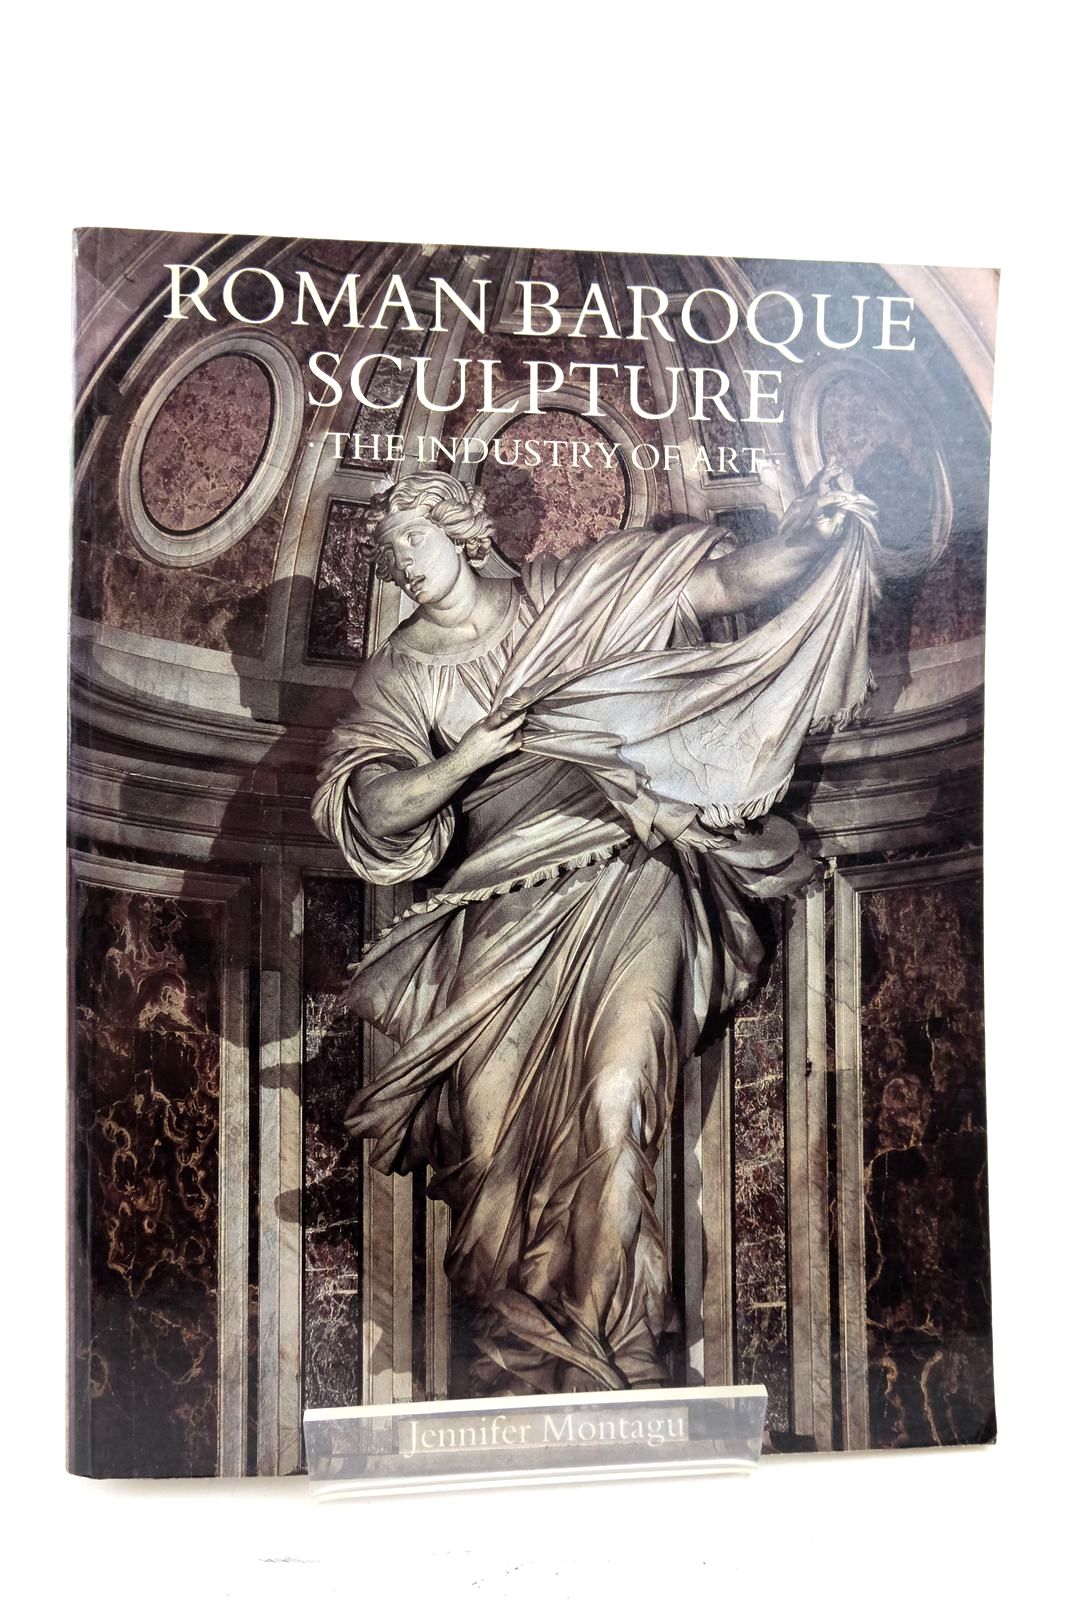 Photo of ROMAN BAROQUE SCULPTURE: THE INDUSTRY OF ART written by Montague, Jennifer published by Yale University Press (STOCK CODE: 2139036)  for sale by Stella & Rose's Books